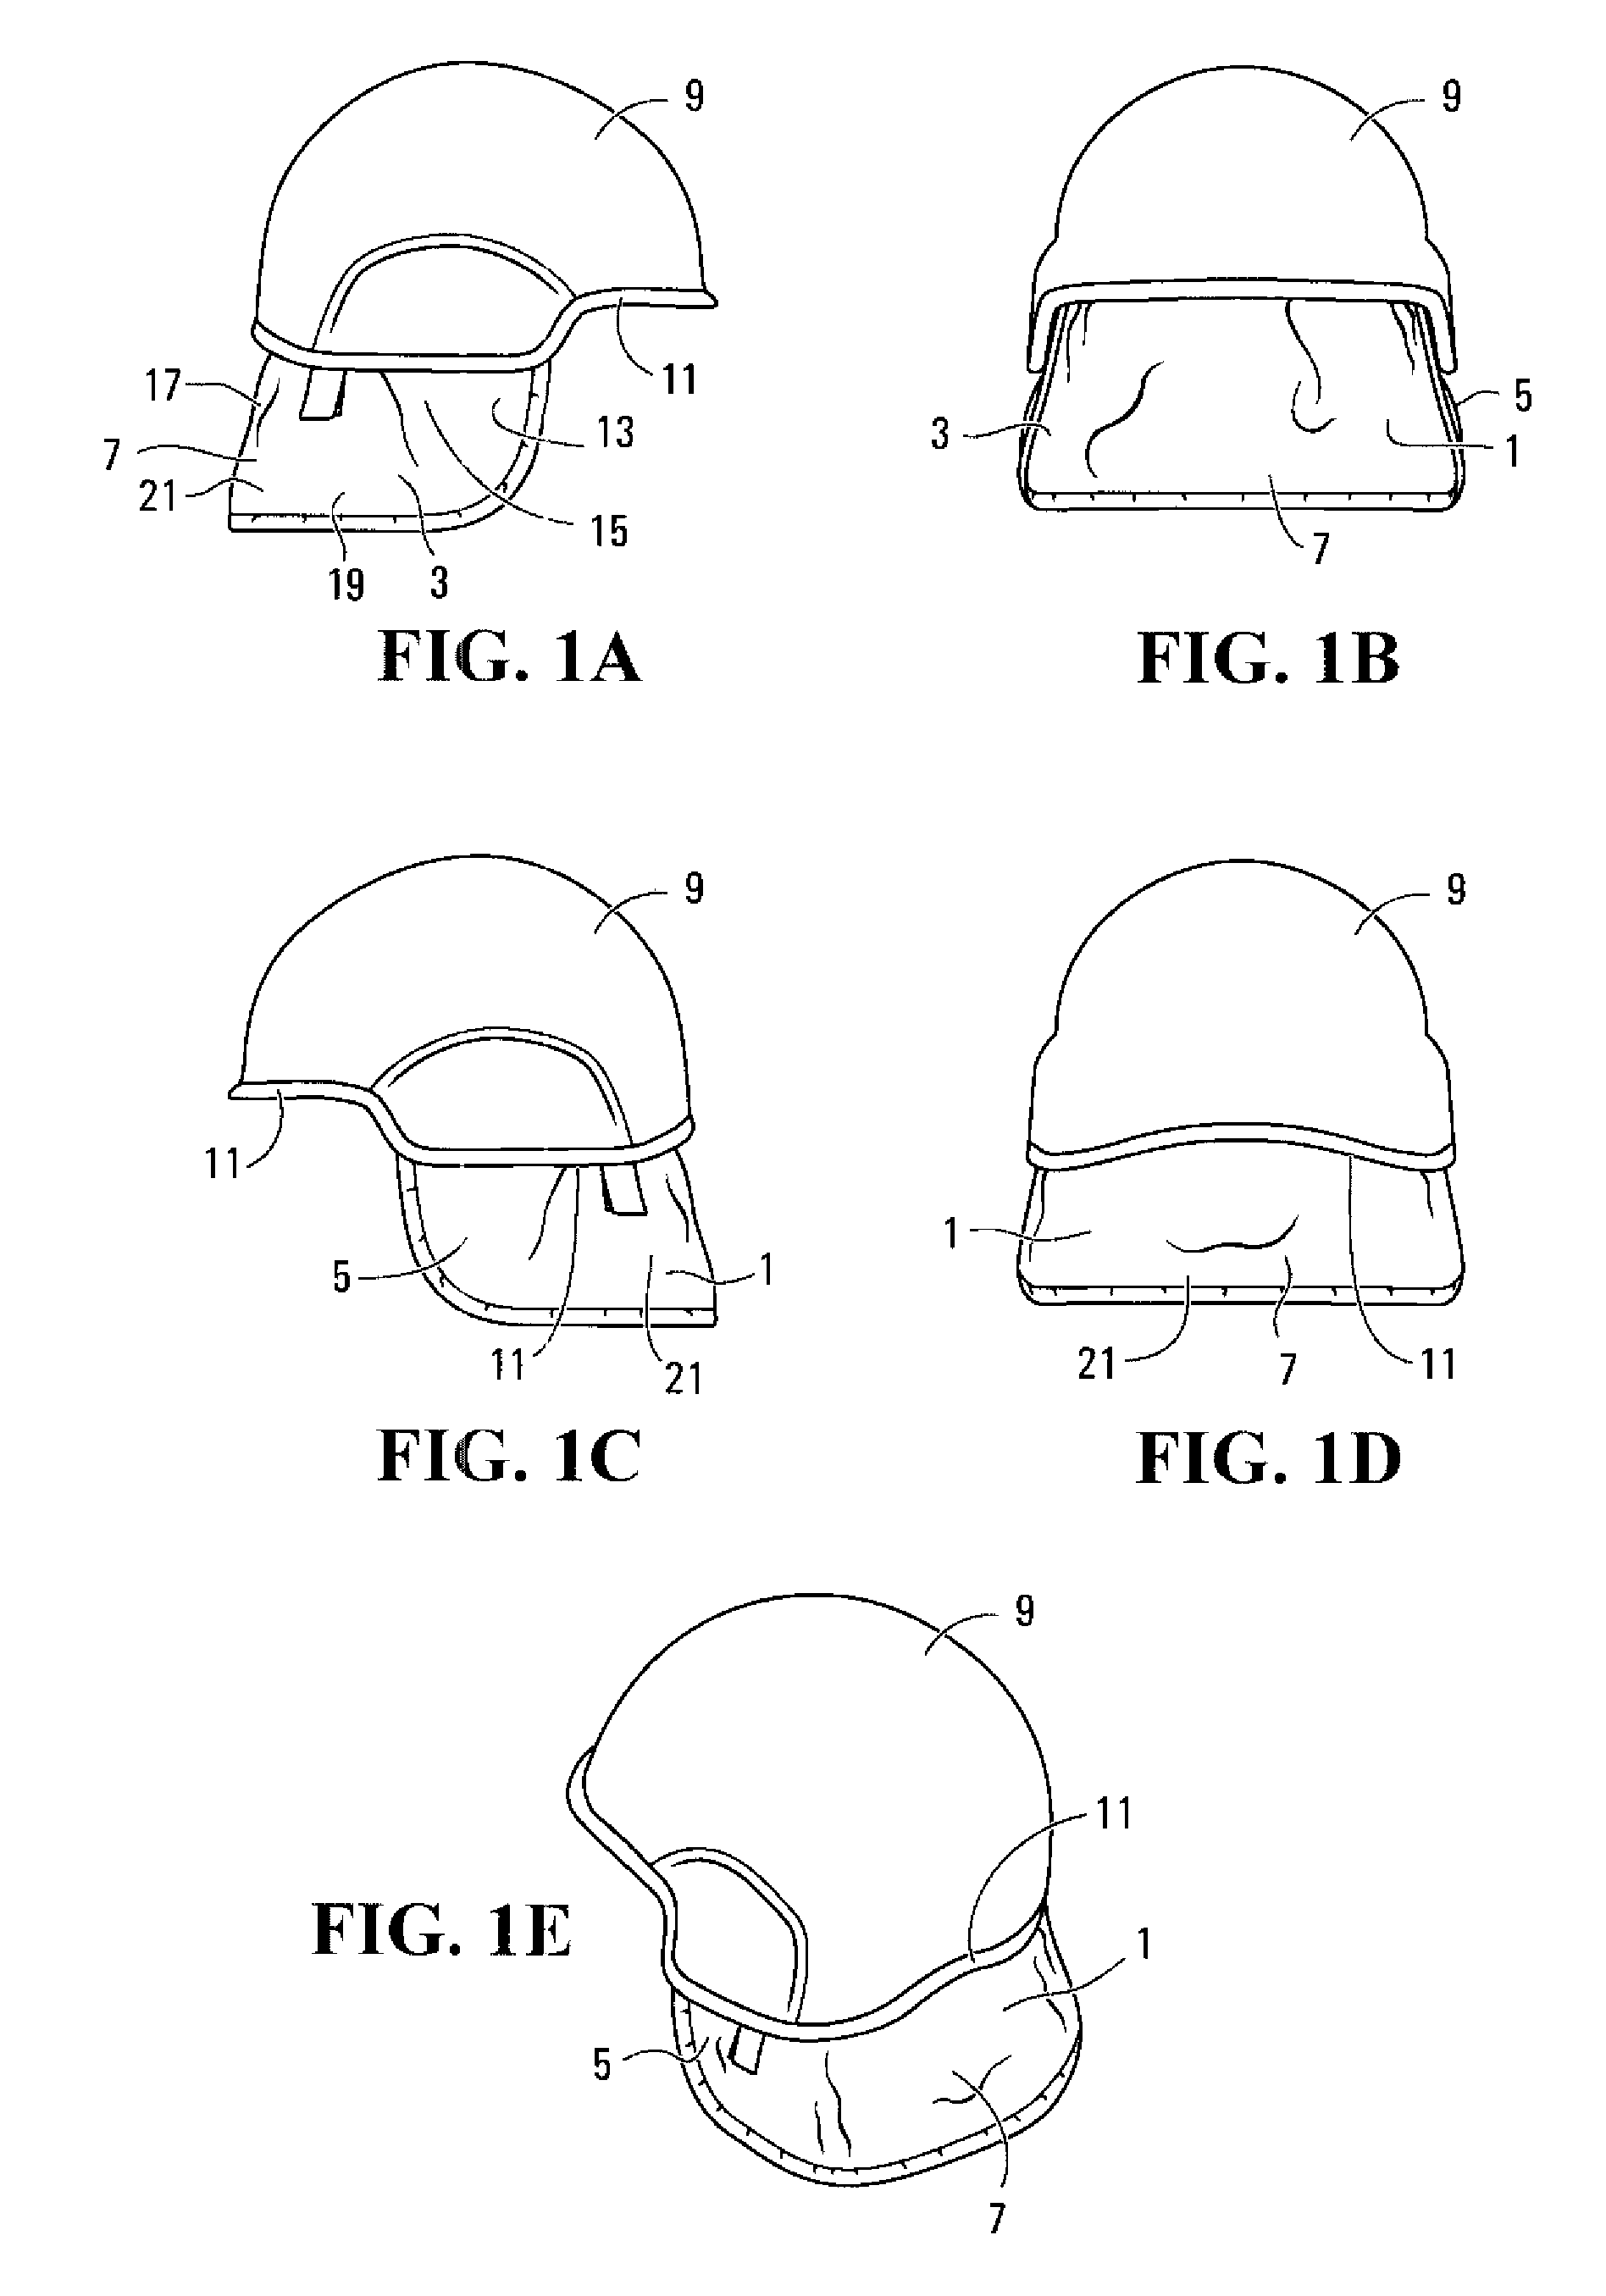 Head and neck protector